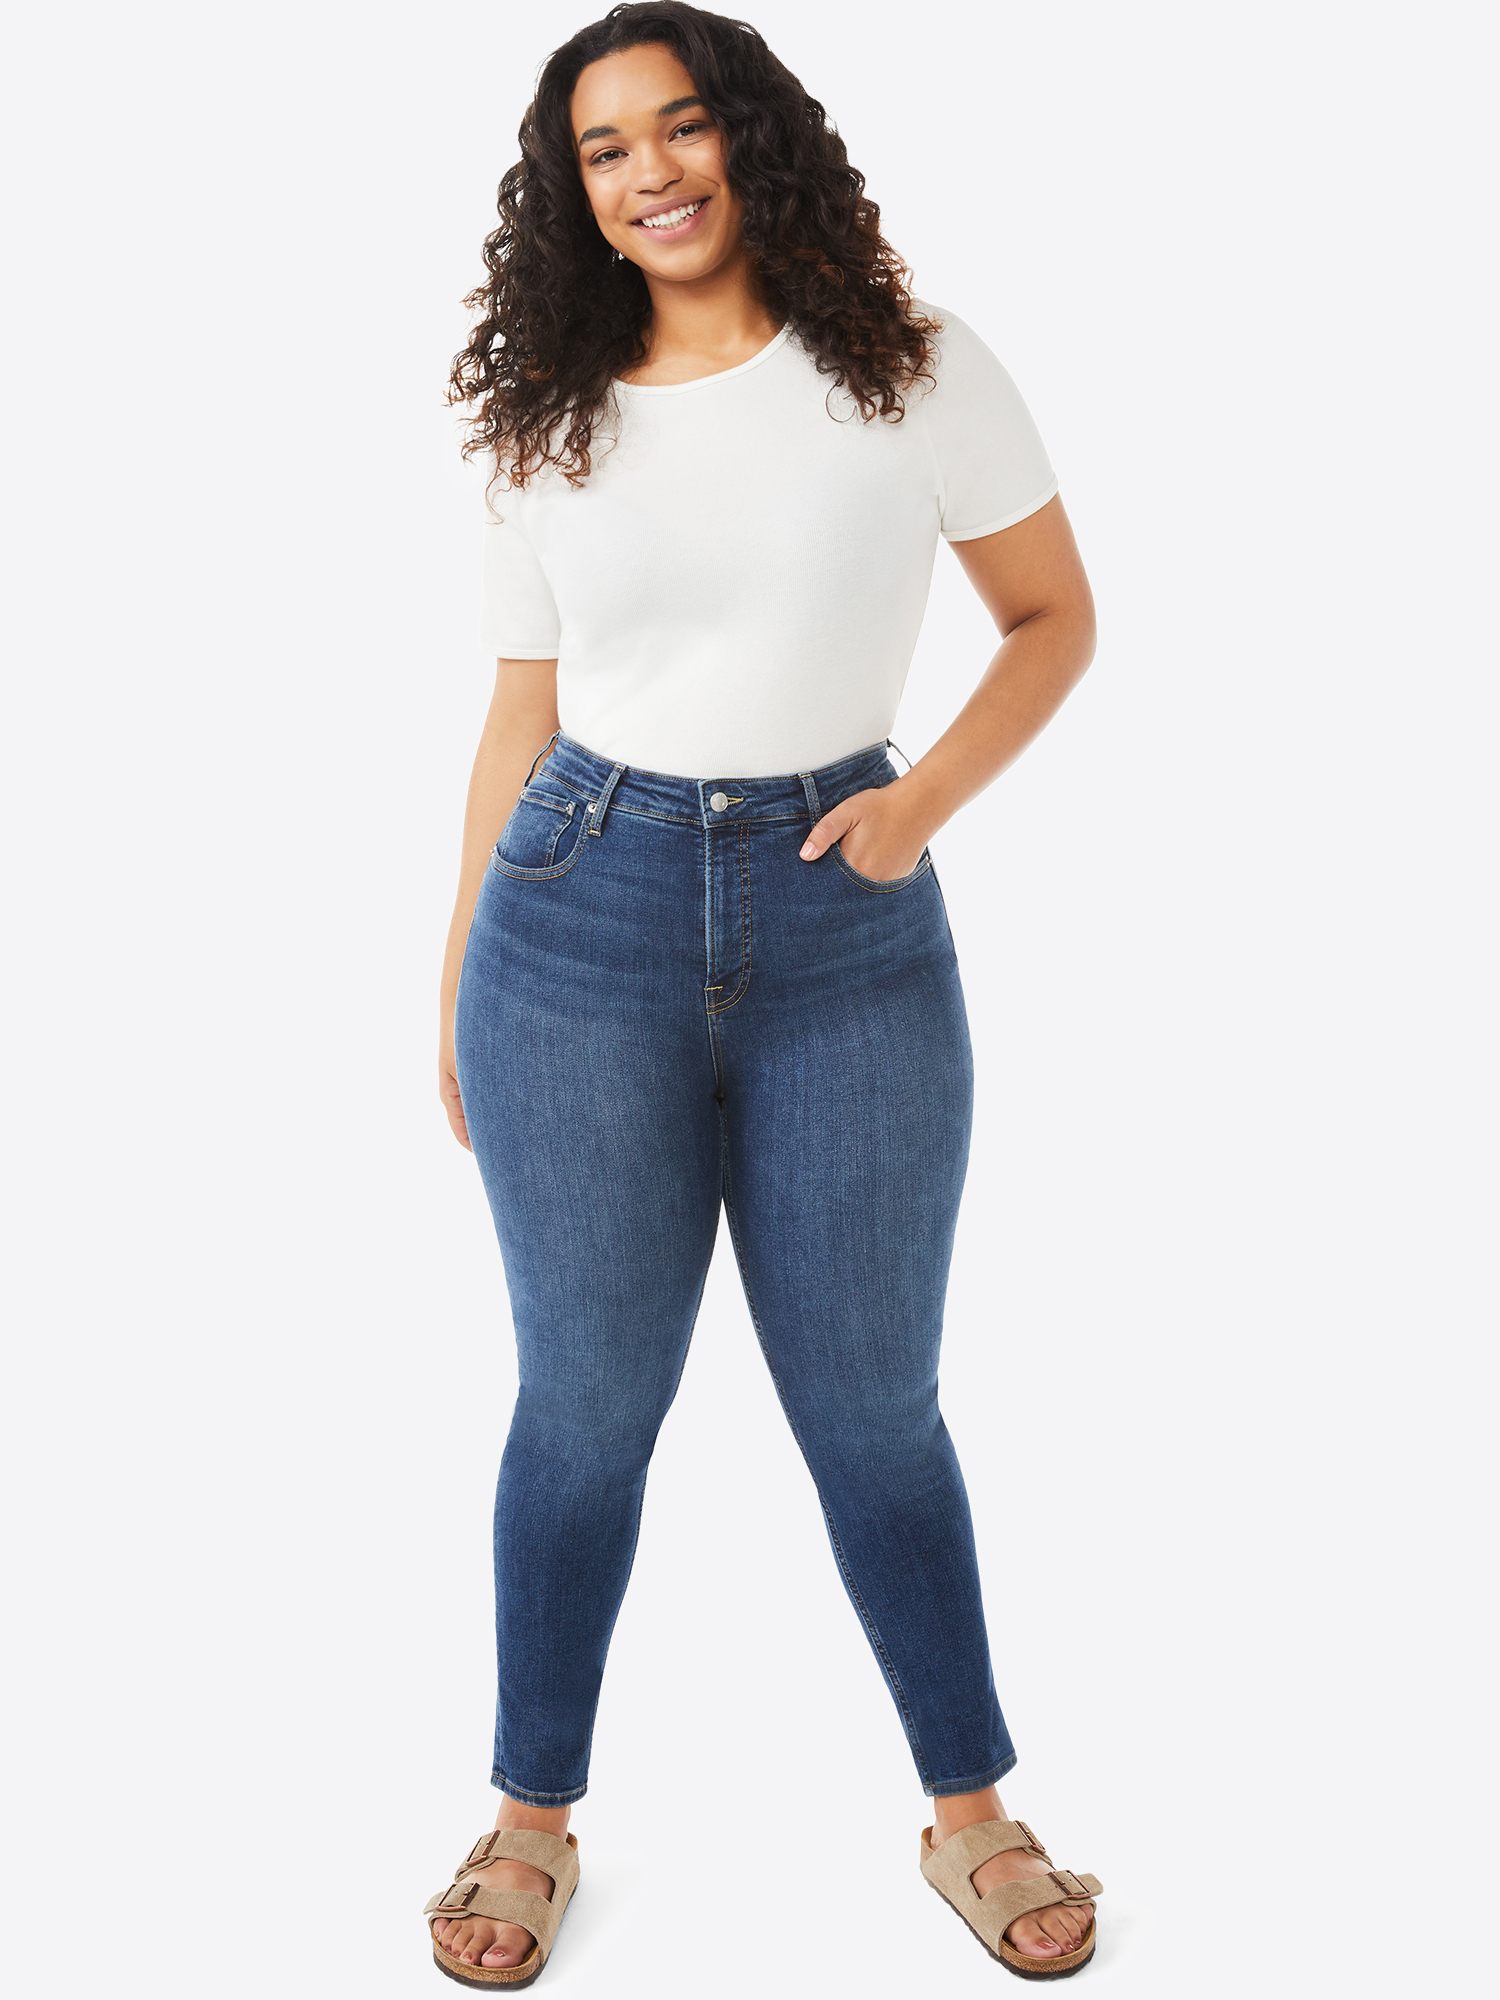 Free Assembly Women's Essential High Rise Skinny Jeans - image 2 of 8